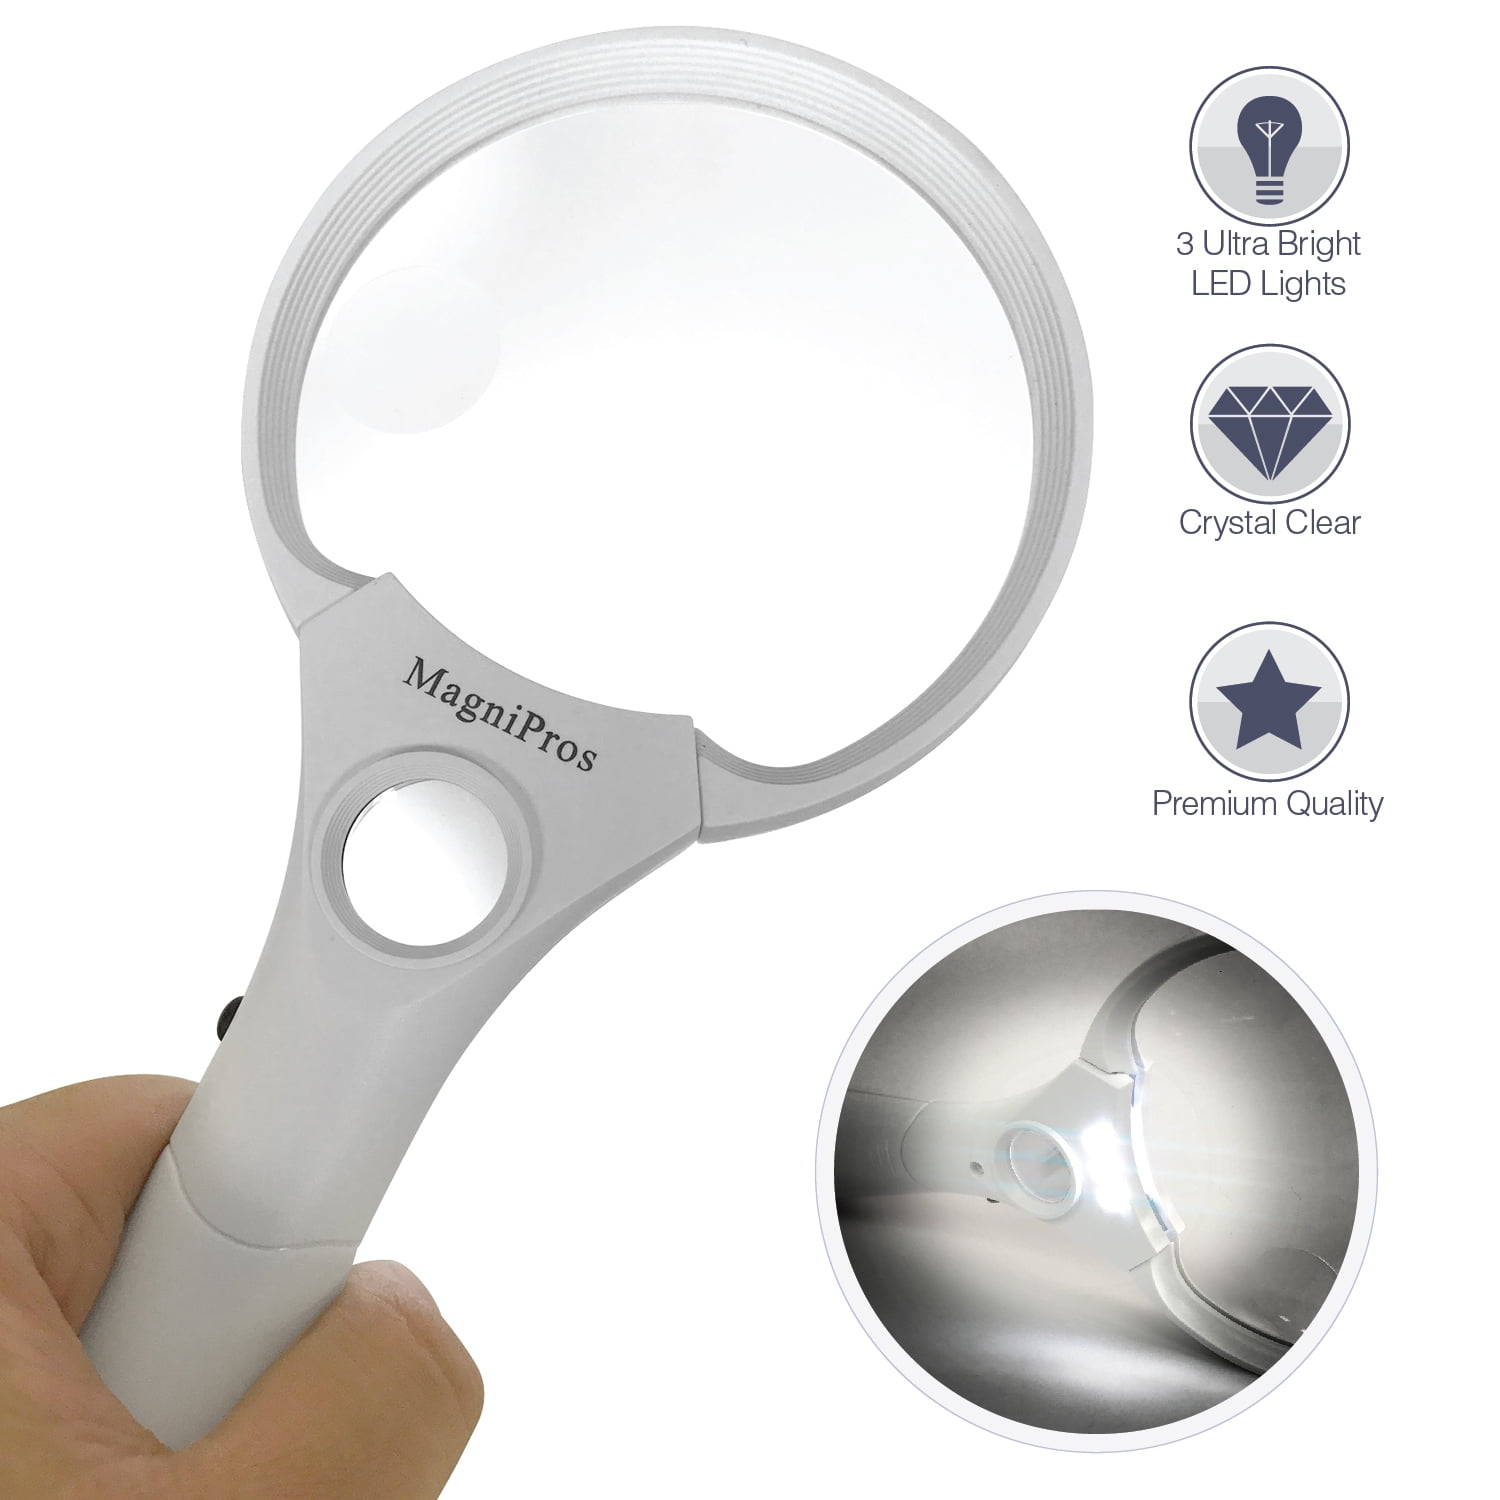 Portable Handheld Magnifying Glass Dual Magnifier ABS Handle Battery Powered LED Lights Racket Shape Regard 